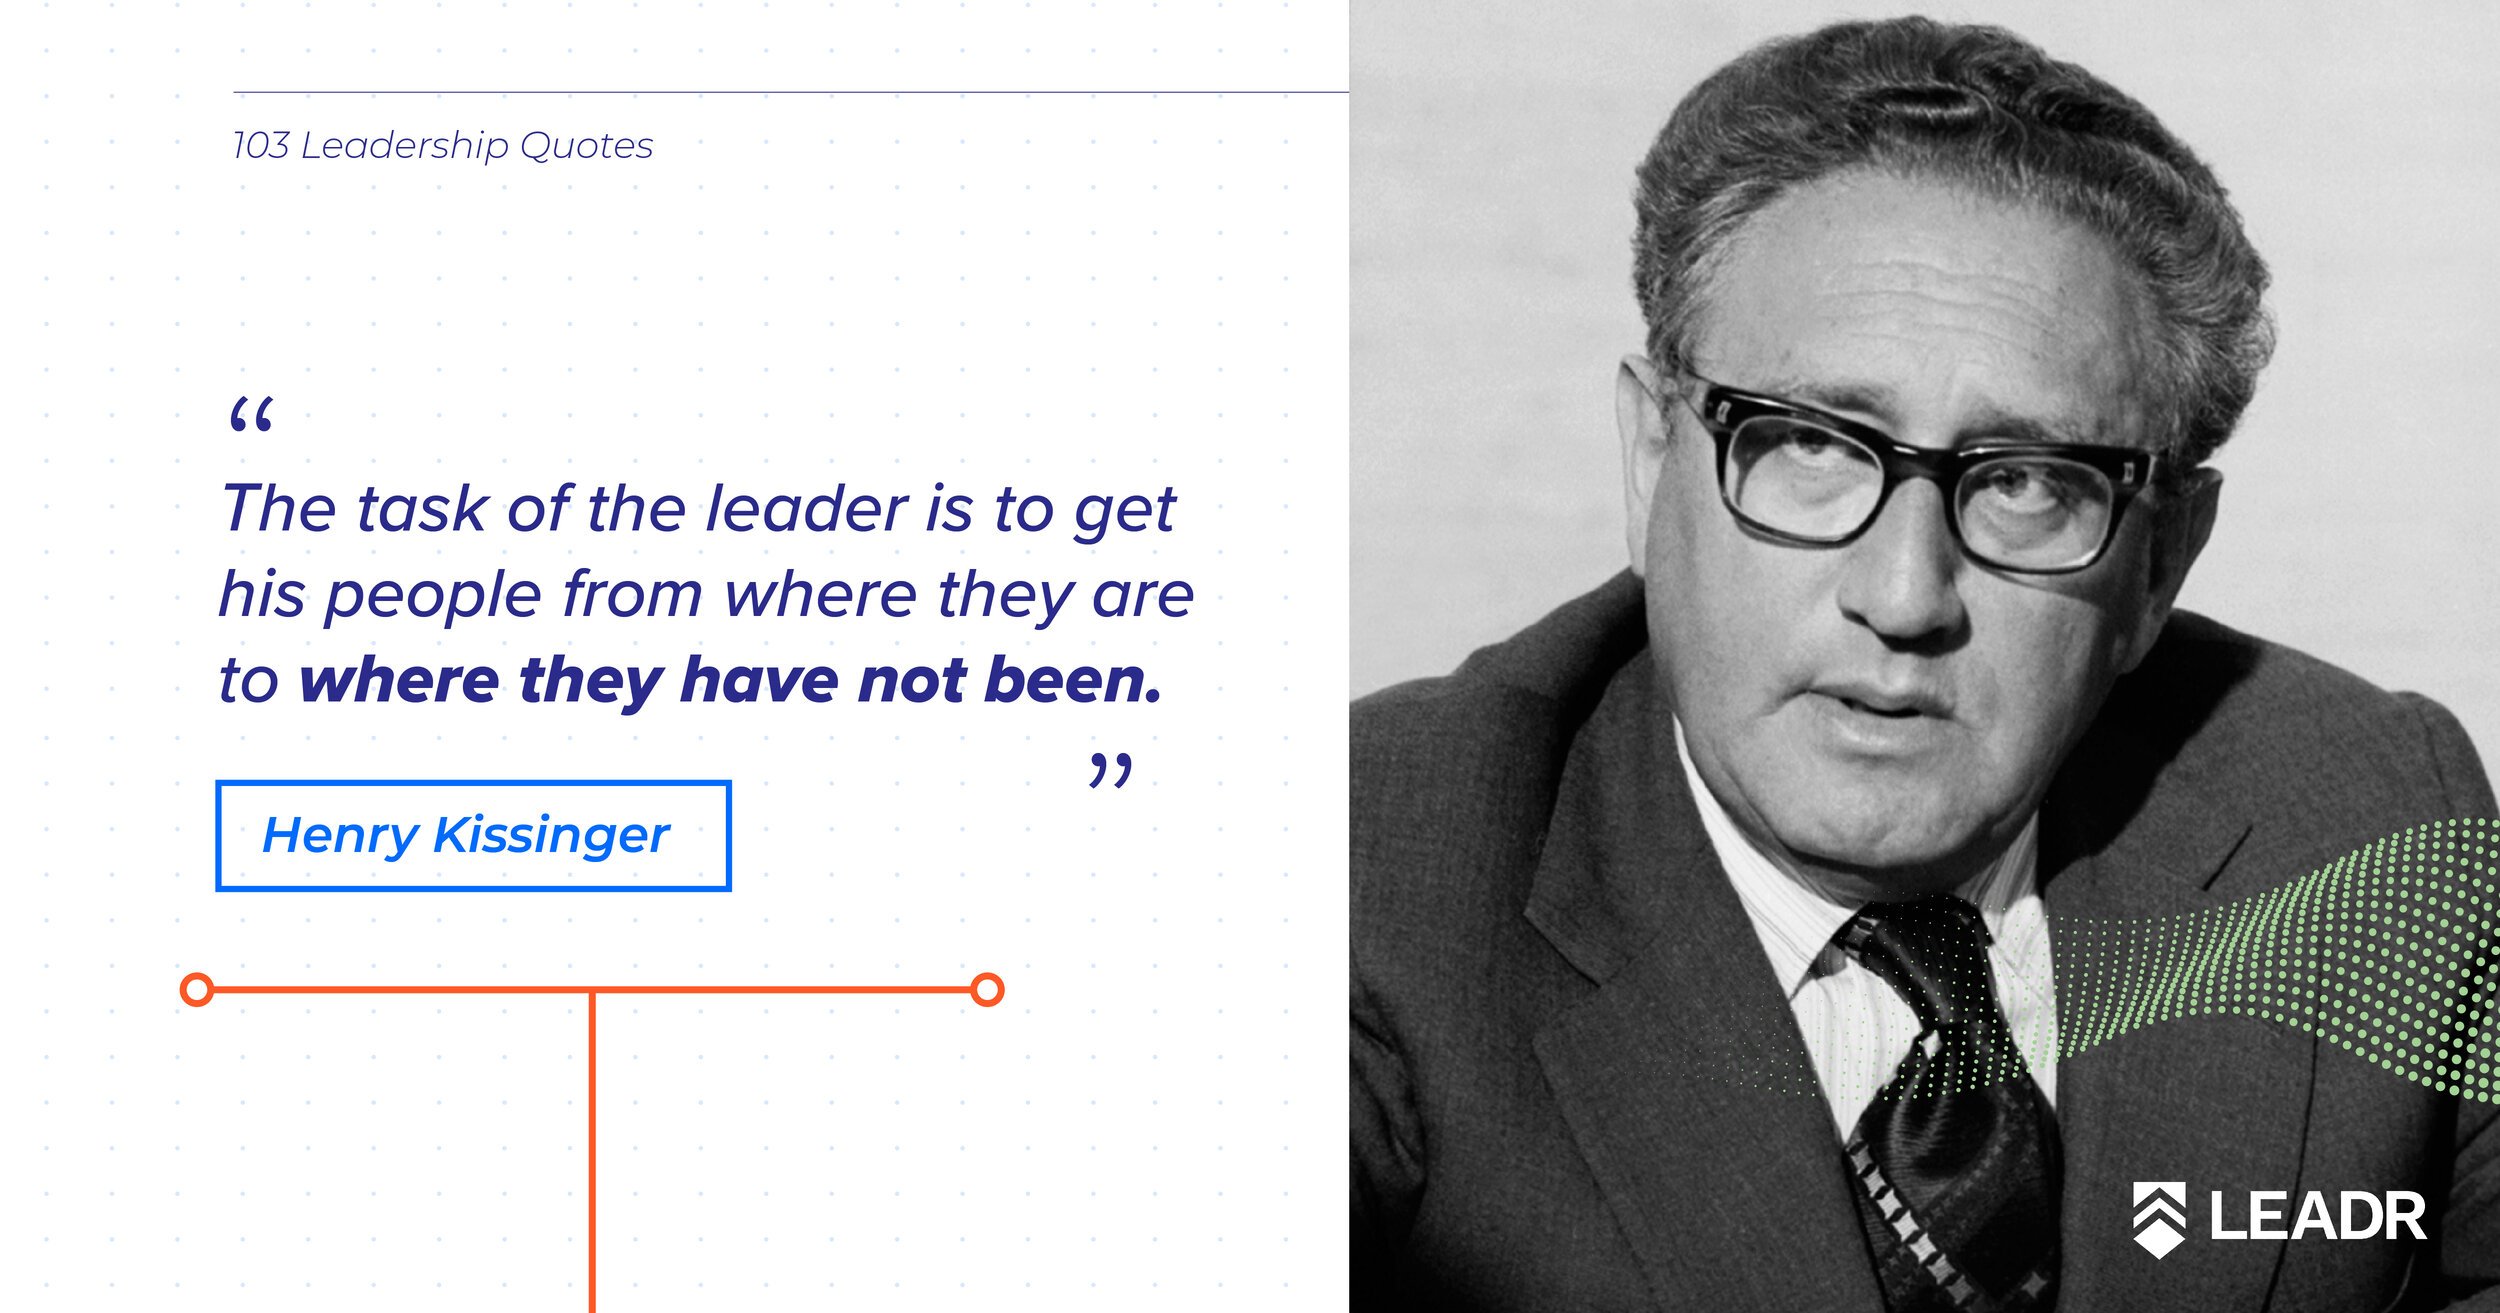 Royalty free downloadable leadership quotes - Henry Kissinger